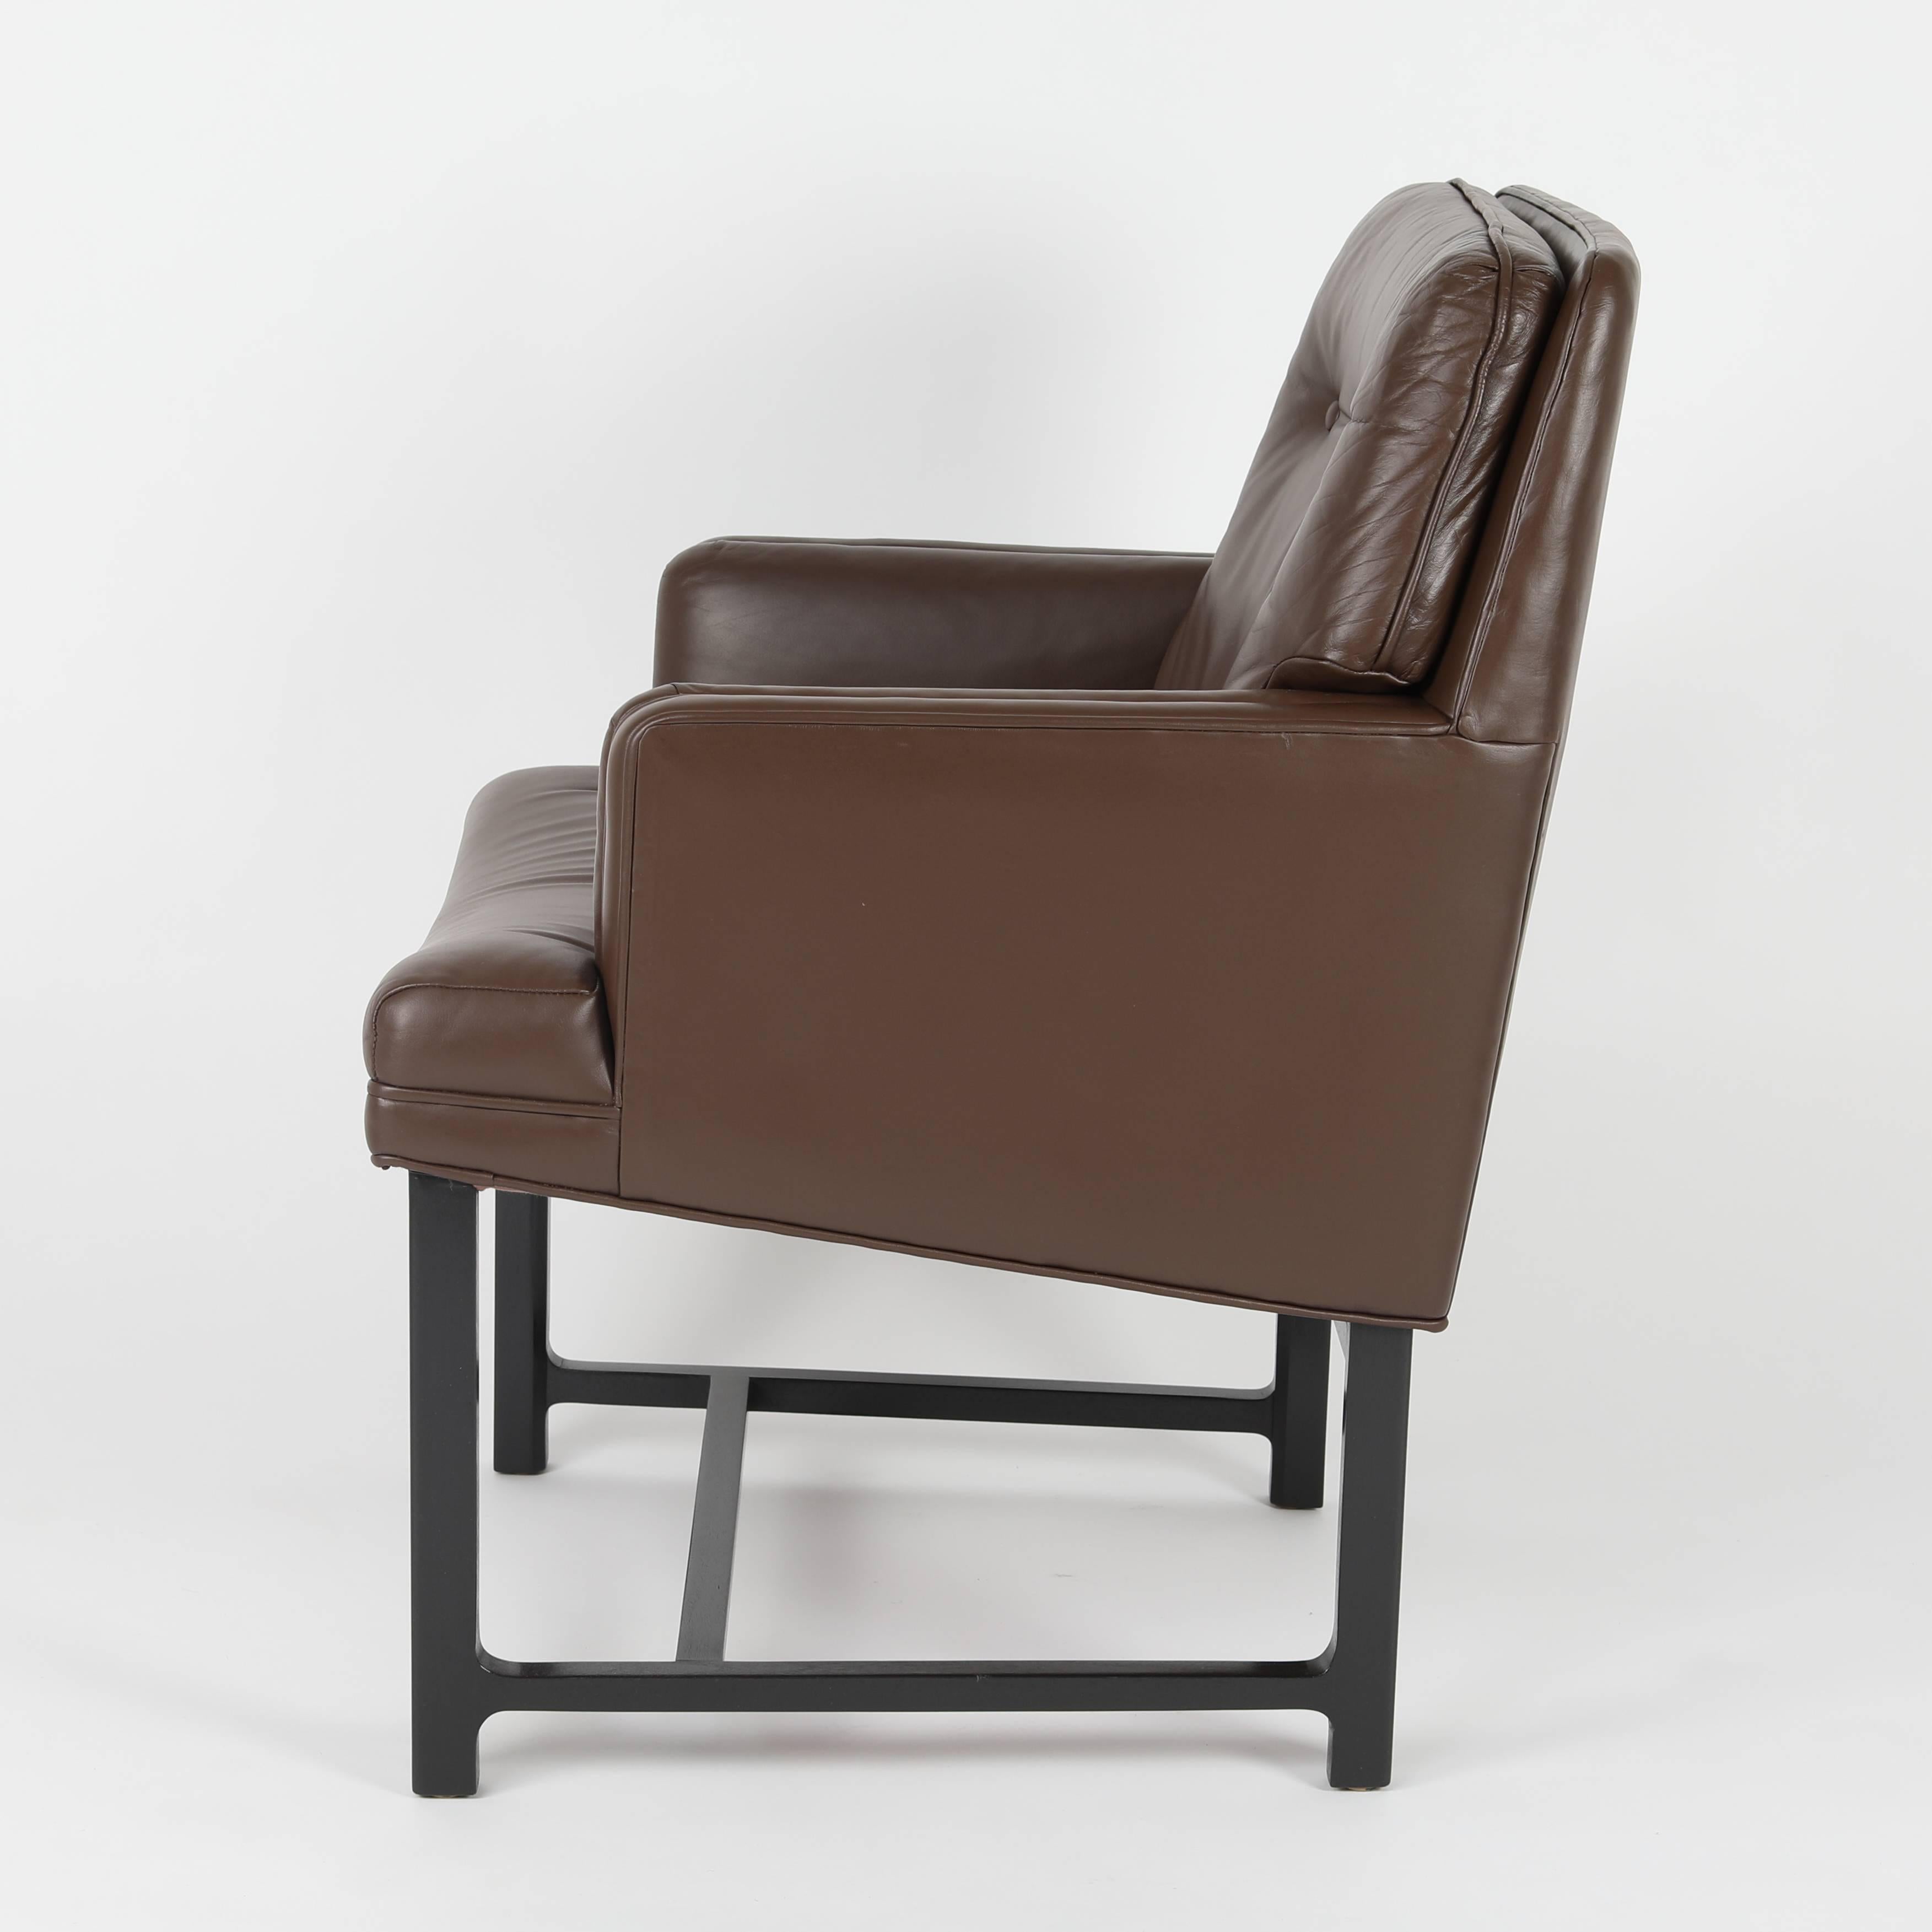 Mid-20th Century Pair of Edward Wormley for Dunbar Armchairs in Leather and Mahogany, circa 1960s For Sale